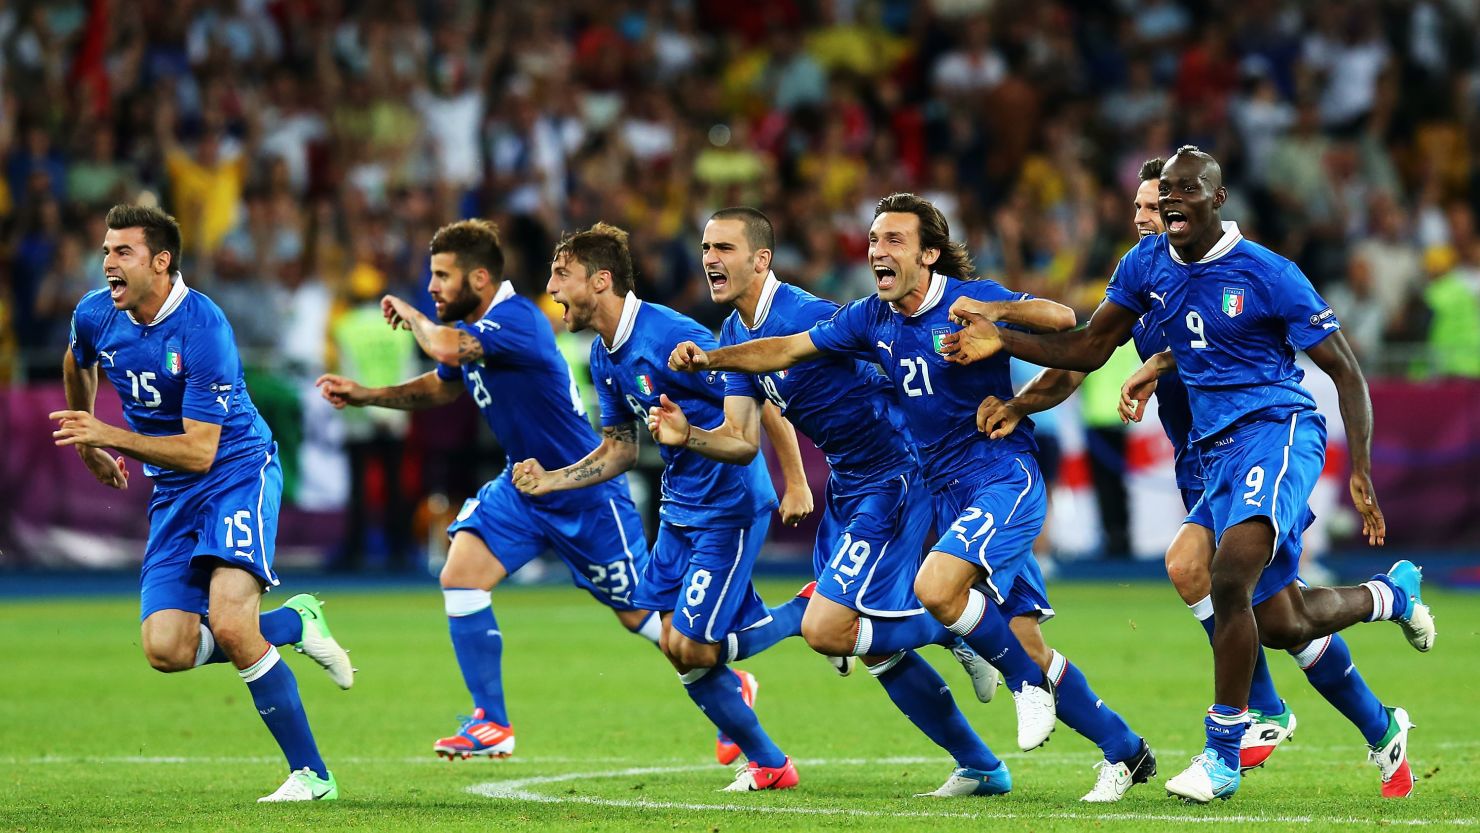 Italy's players celebrate their penalty shootout victory over England in their Euro 2012 quarterfinal in Kiev.